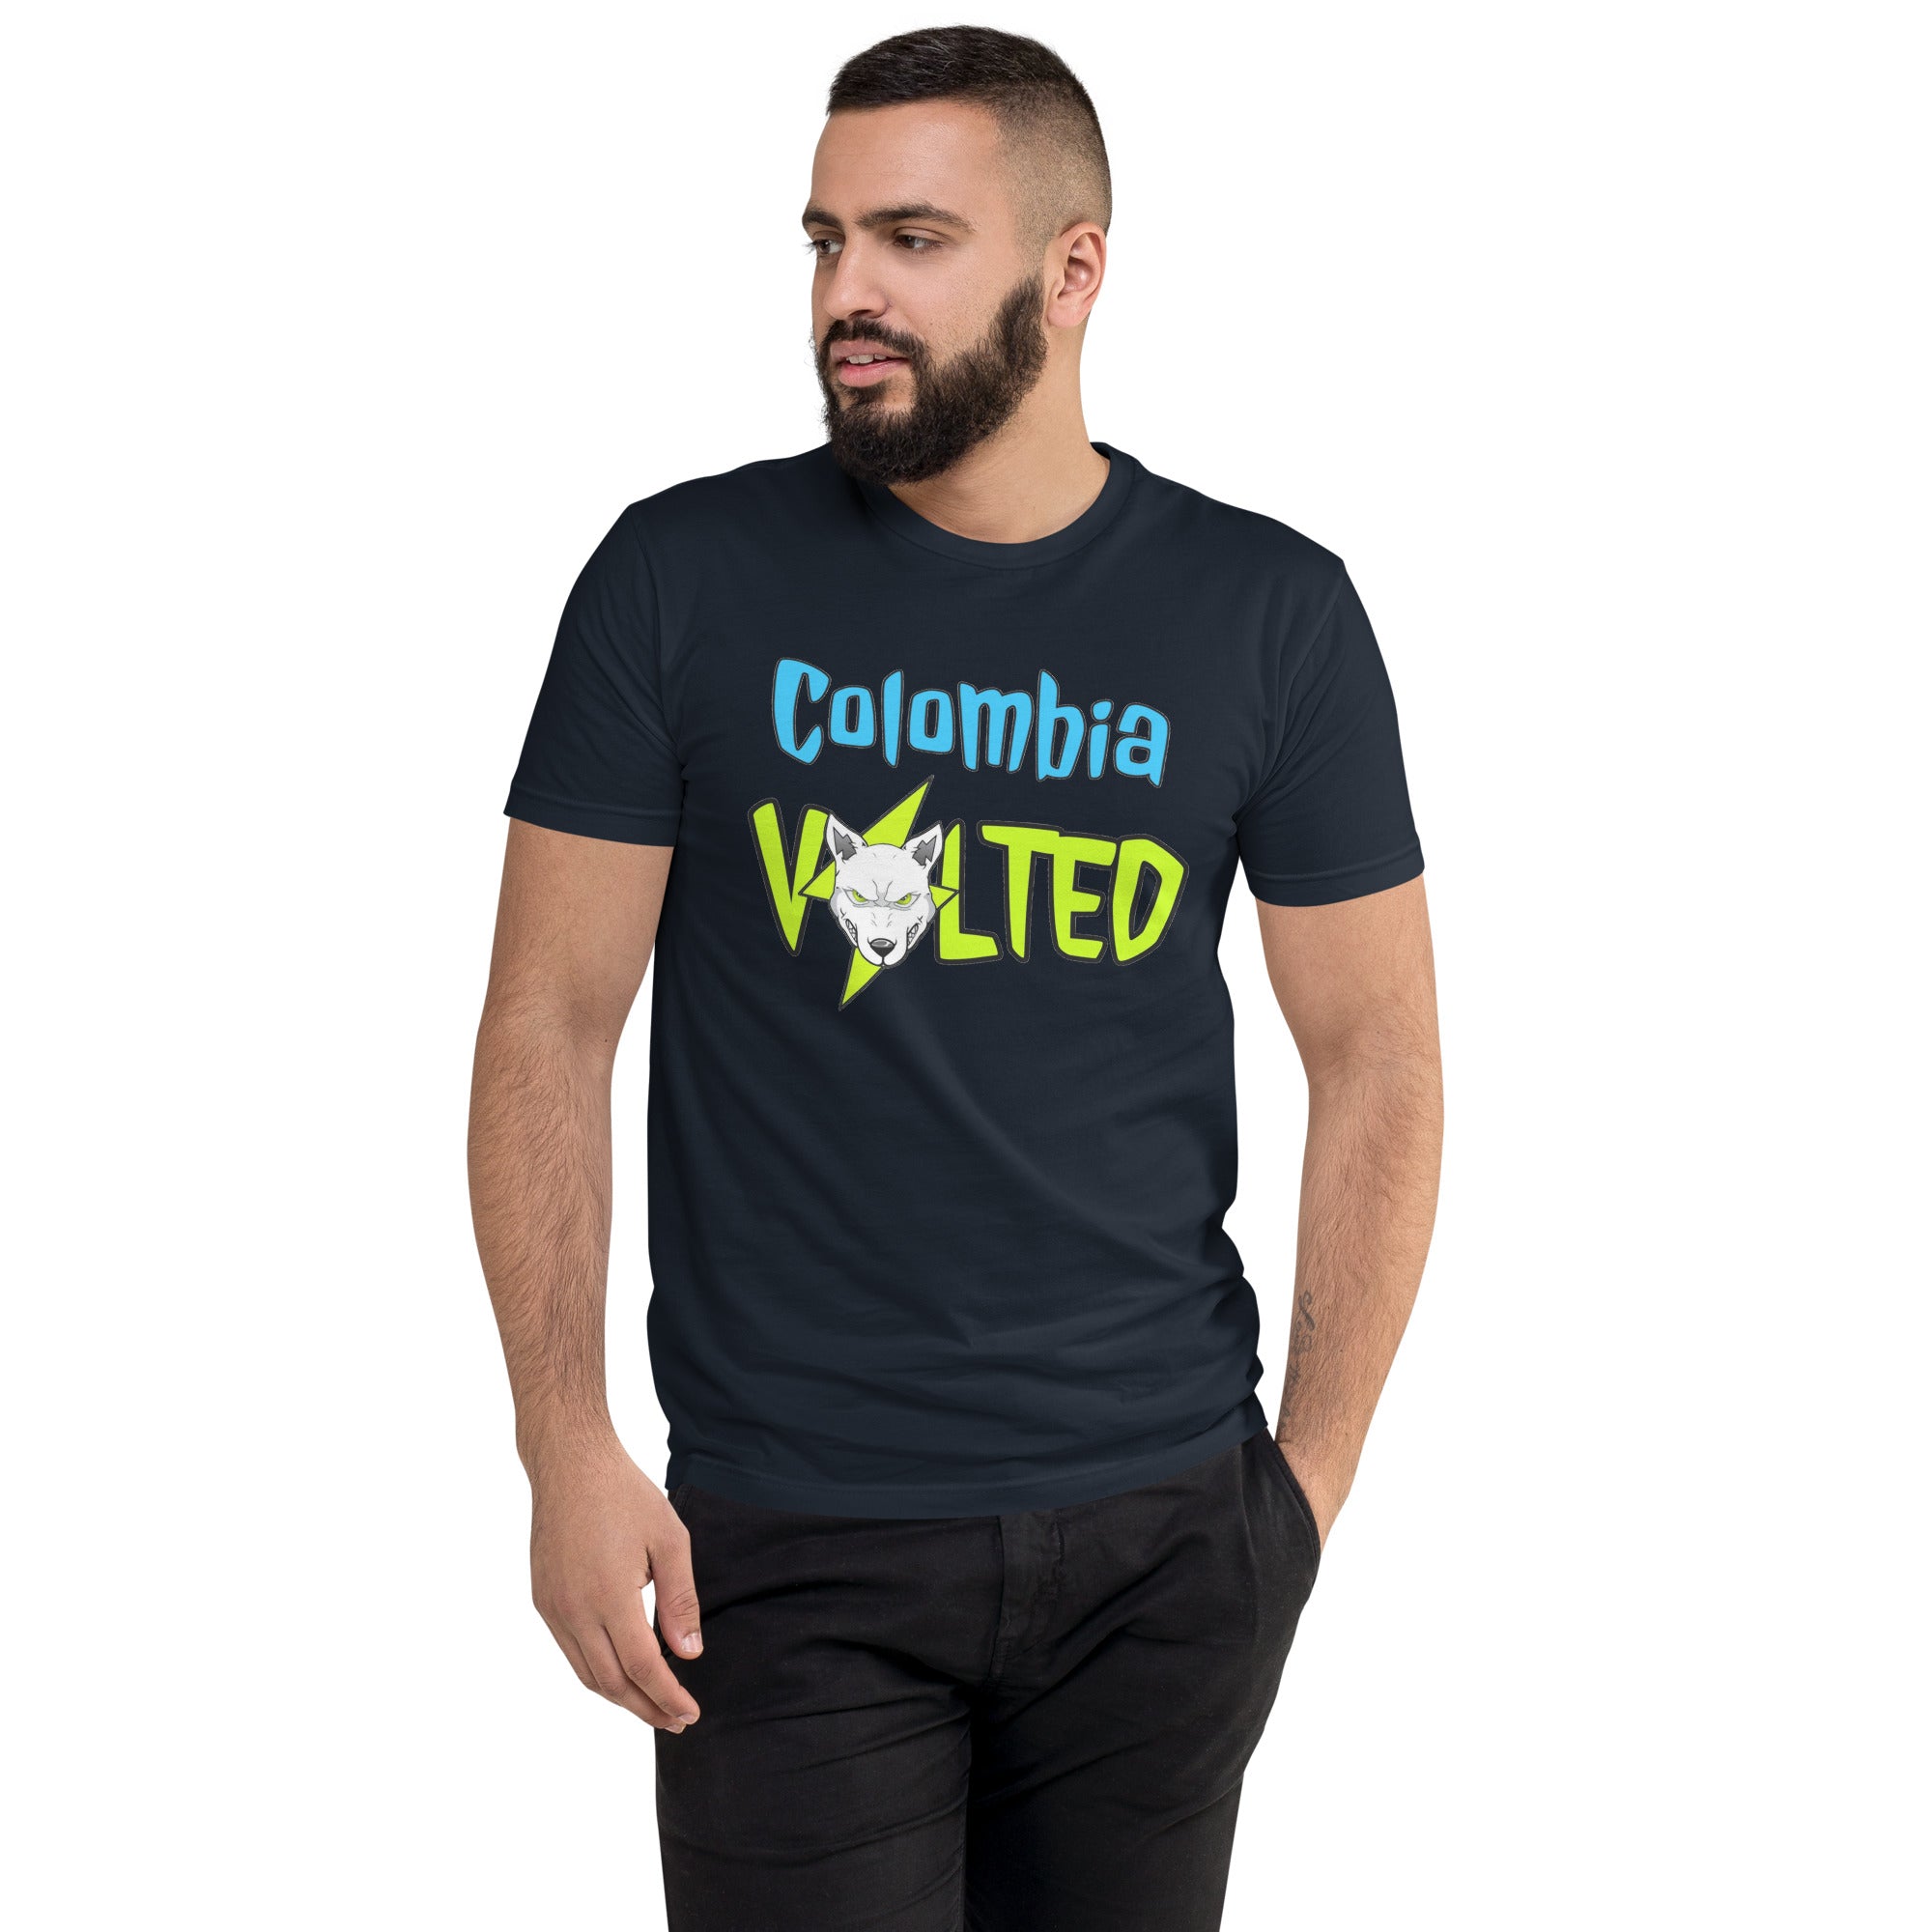 Colombia Volted - NFTees365